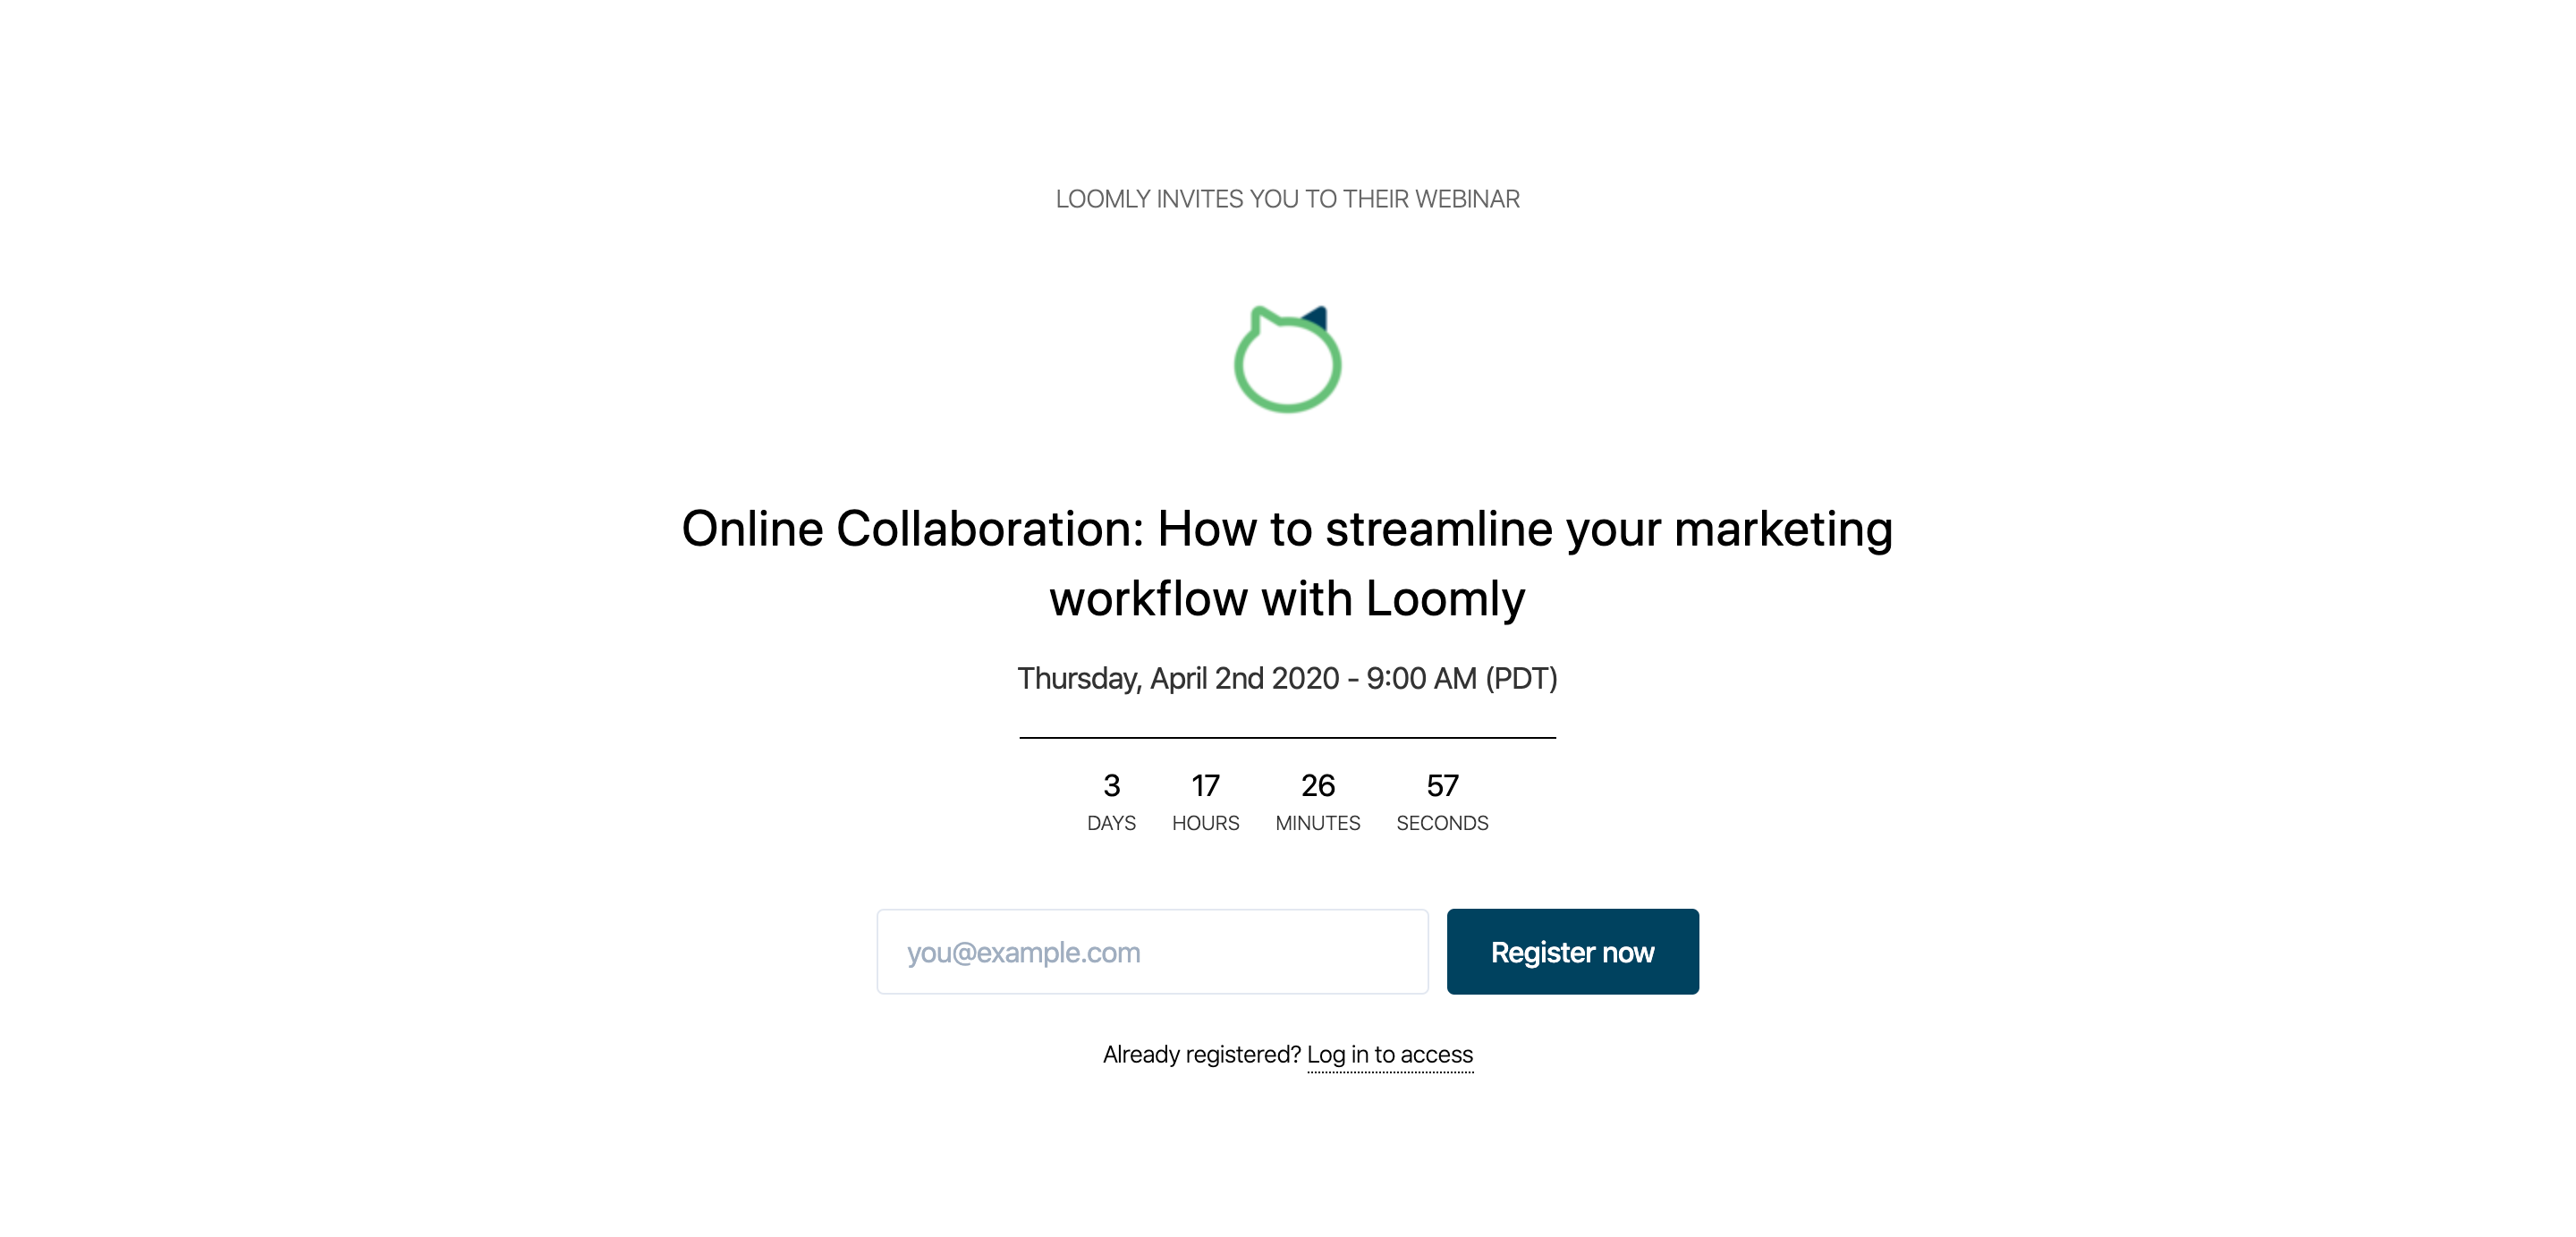 Coronavirus Lockdown Guide Online Conferences and Webinars Online Collaboration How to streamline your marketing workflow with Loomly